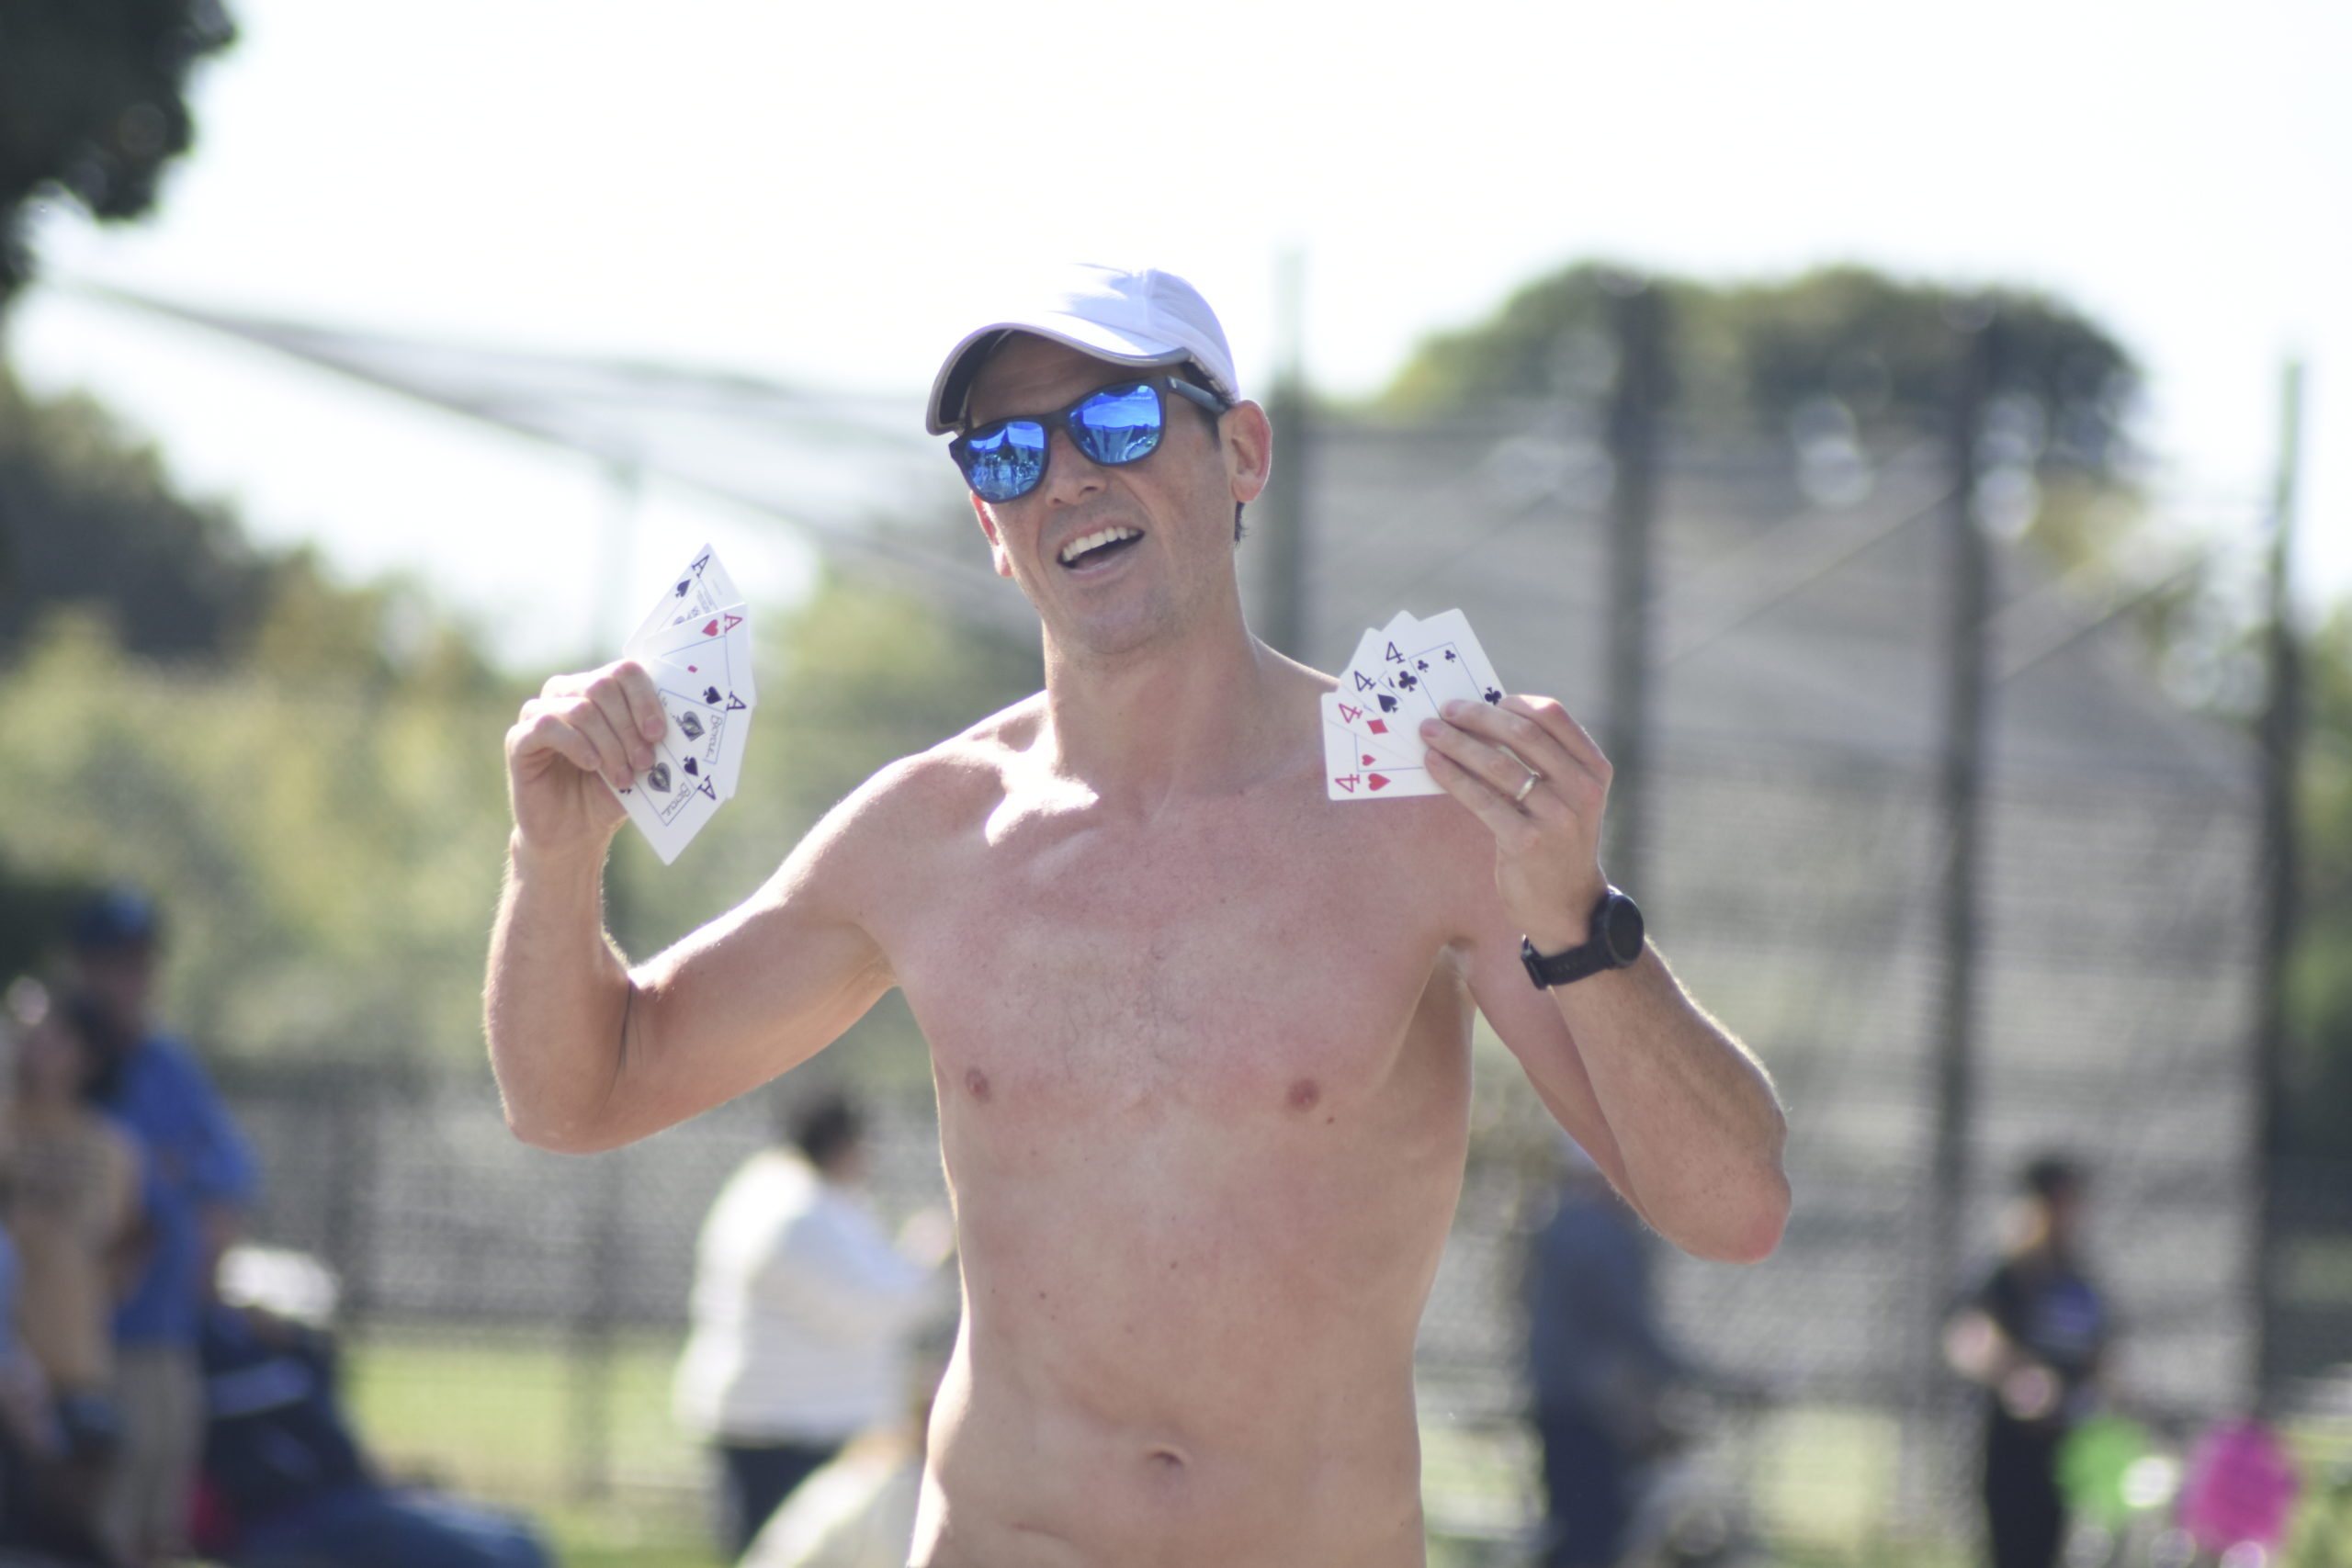 Oz Pearlman of Brooklyn placed second overall in the Hamptons Marathon on Saturday.